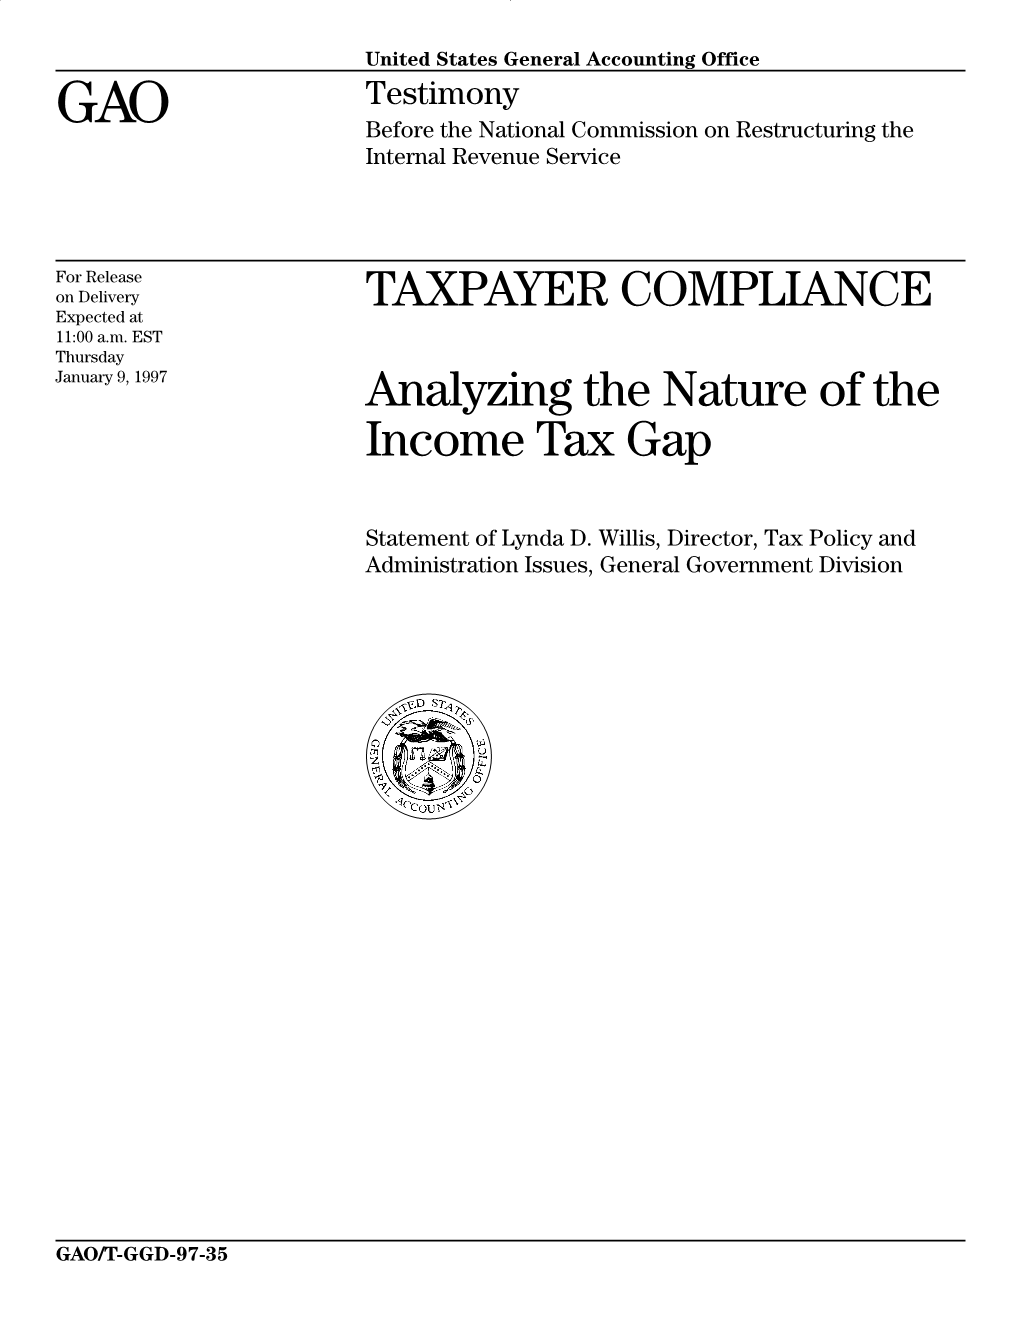 T-GGD-97-35 Taxpayer Compliance: Analyzing the Nature of the Income